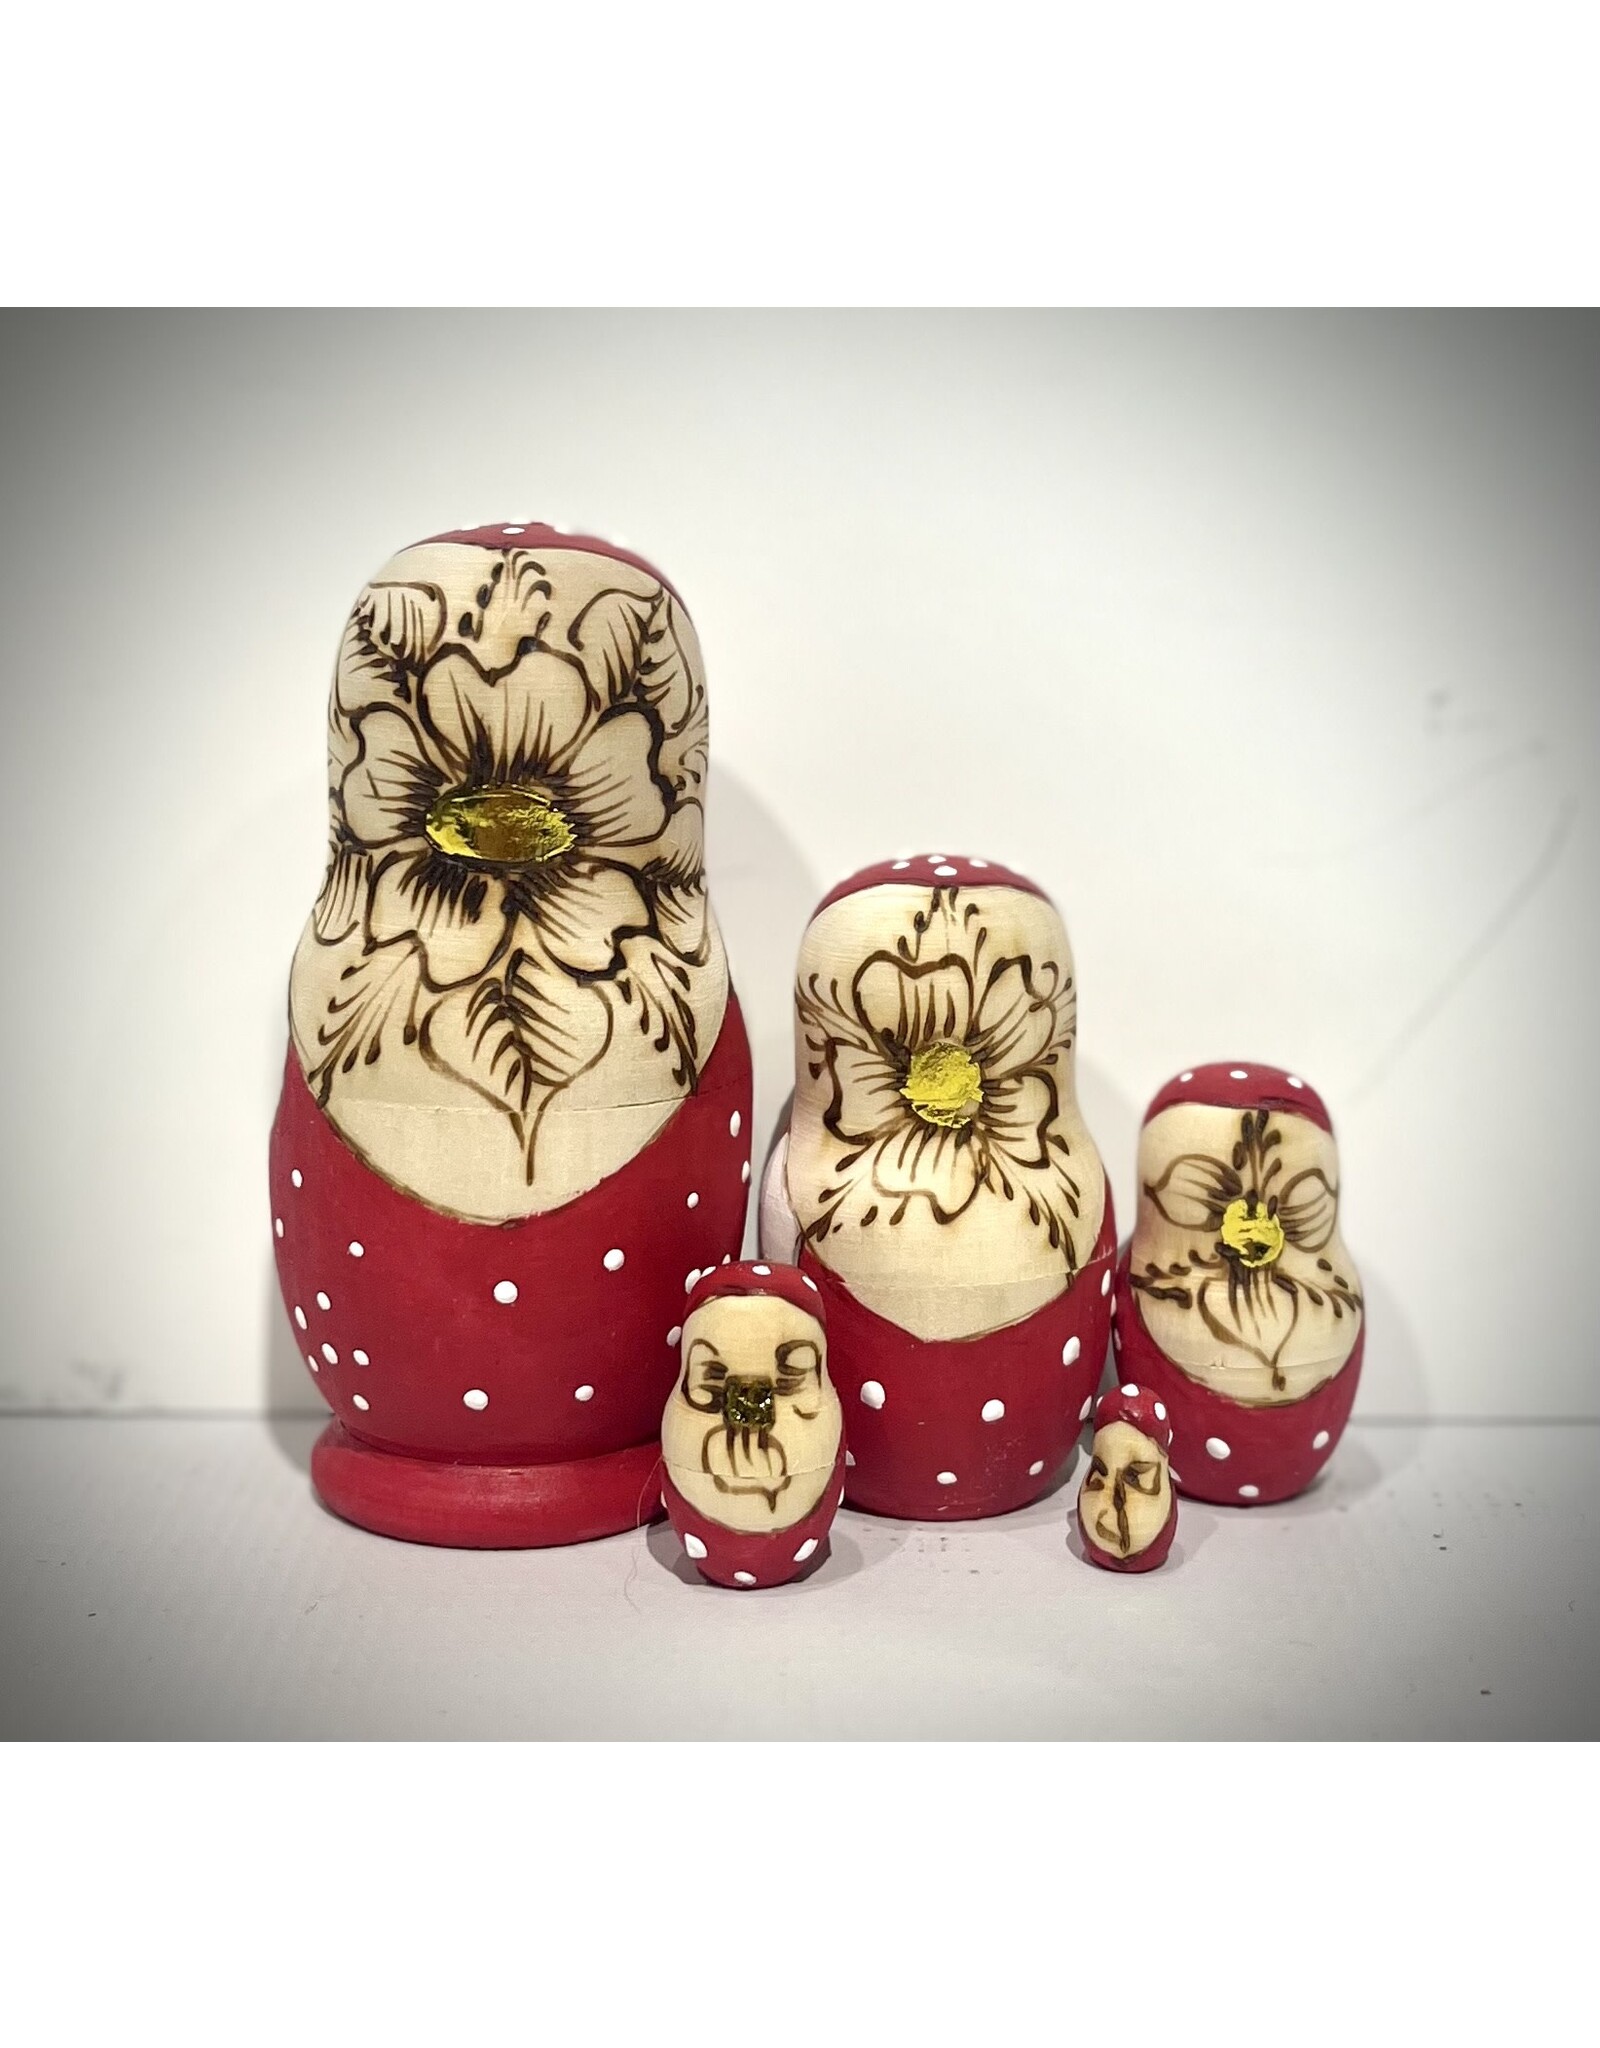 Burned Wood Matryoshka with Braid in Red